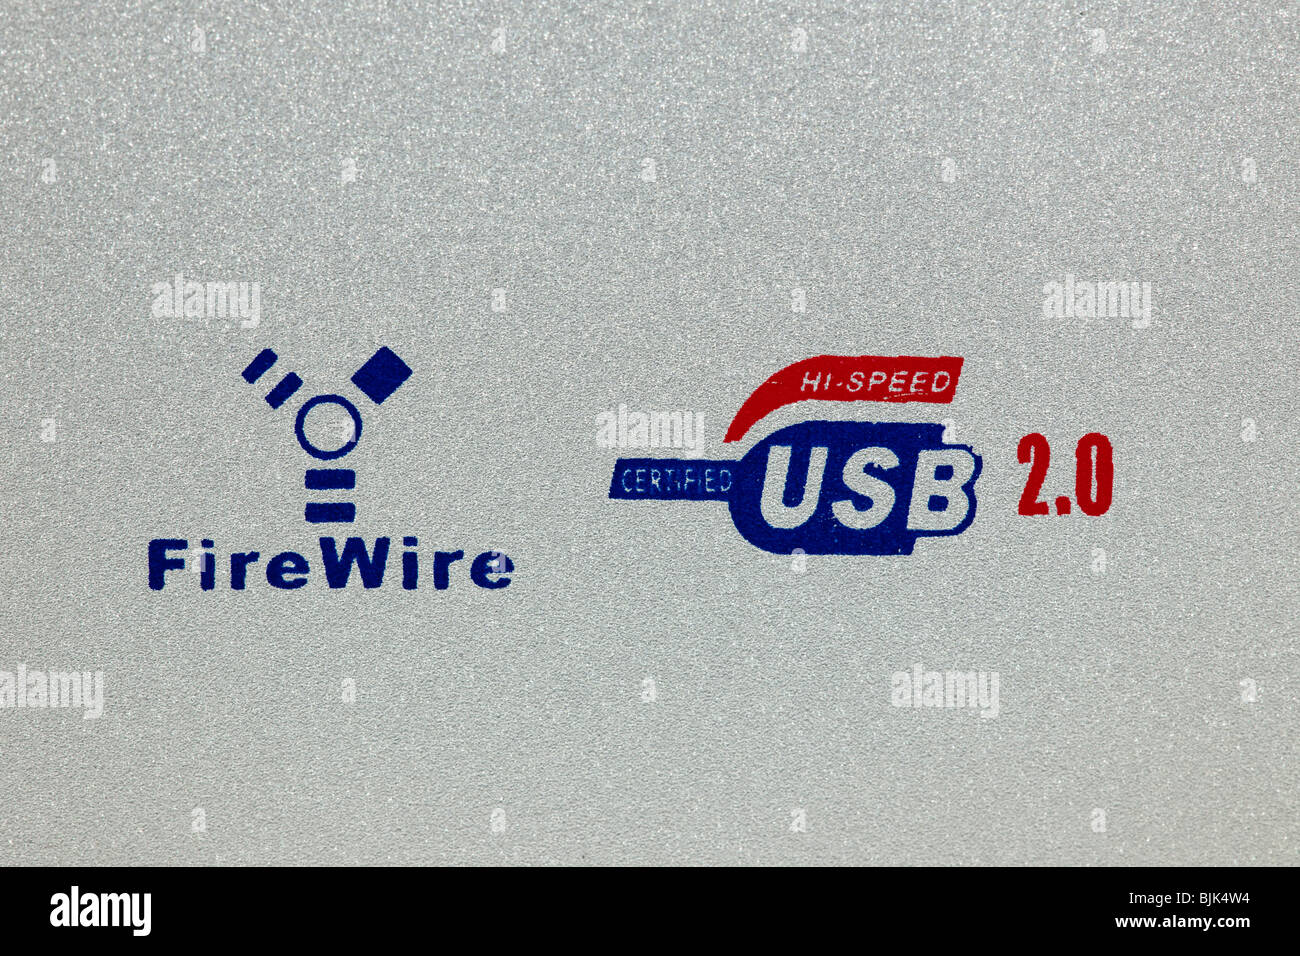 Firewire and USB 2.0 markings Stock Photo